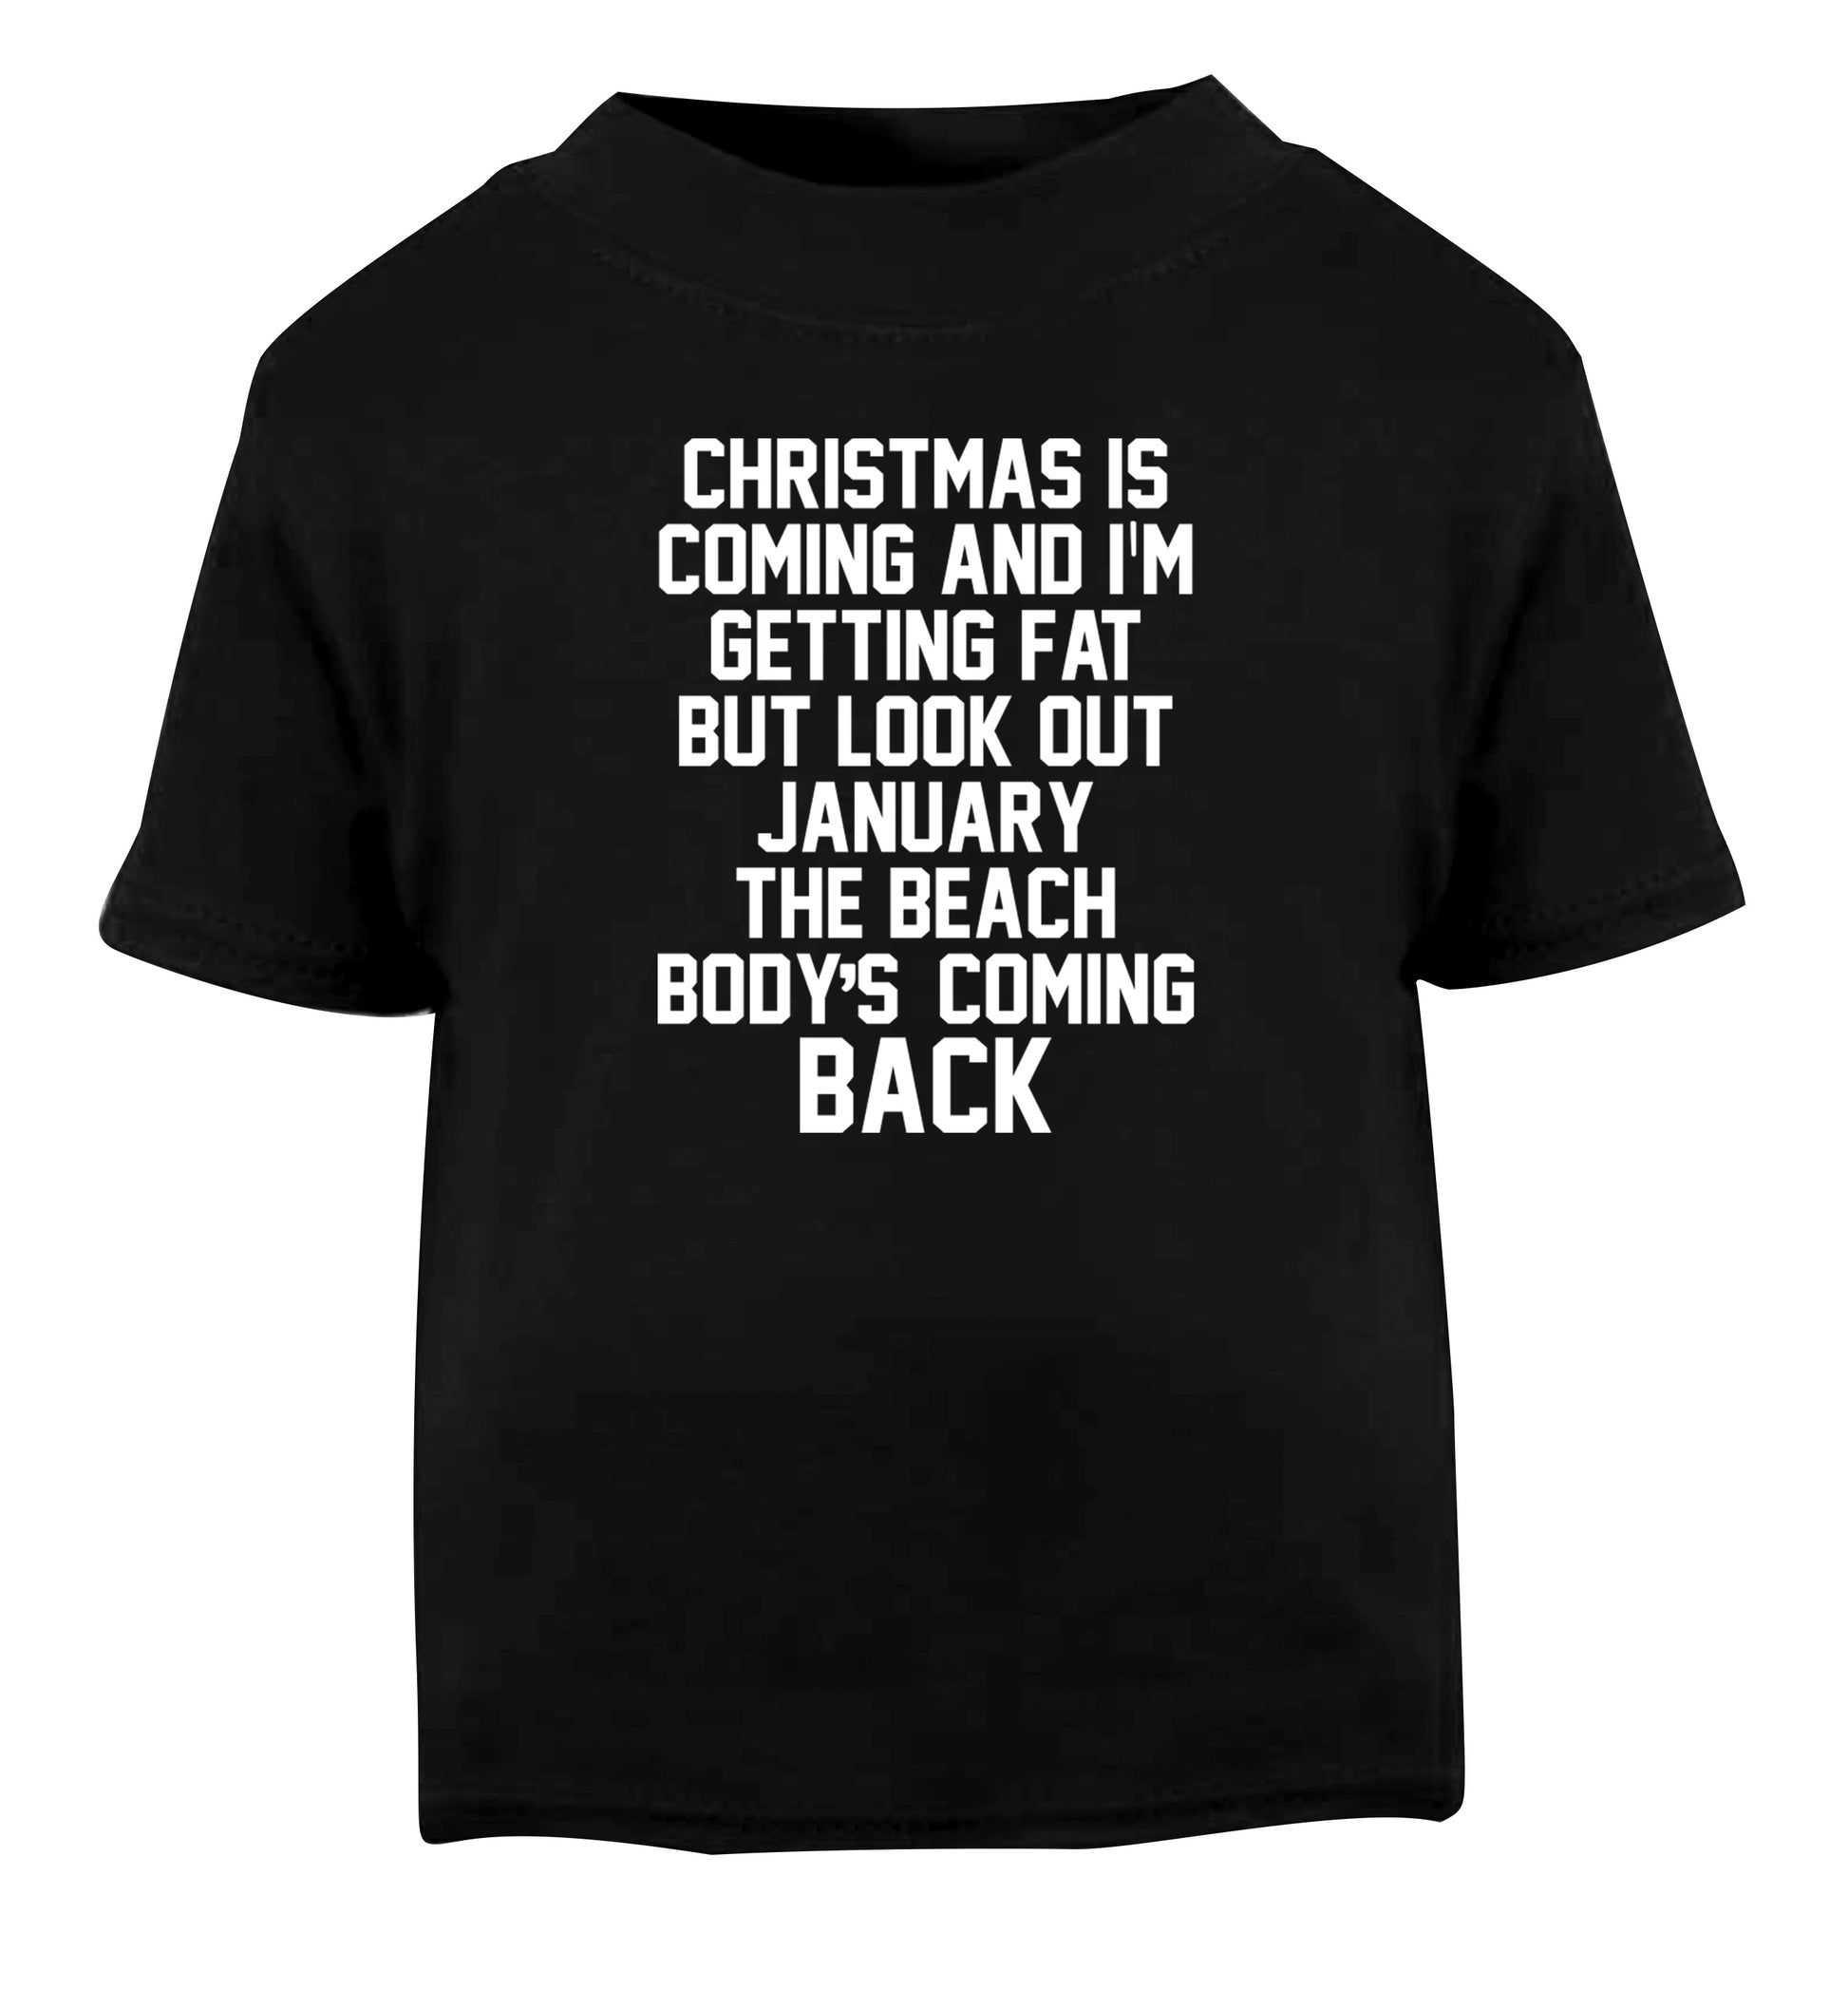 Christmas is coming and I'm getting fat but look out January the beach body's coming back! Black Baby Toddler Tshirt 2 years